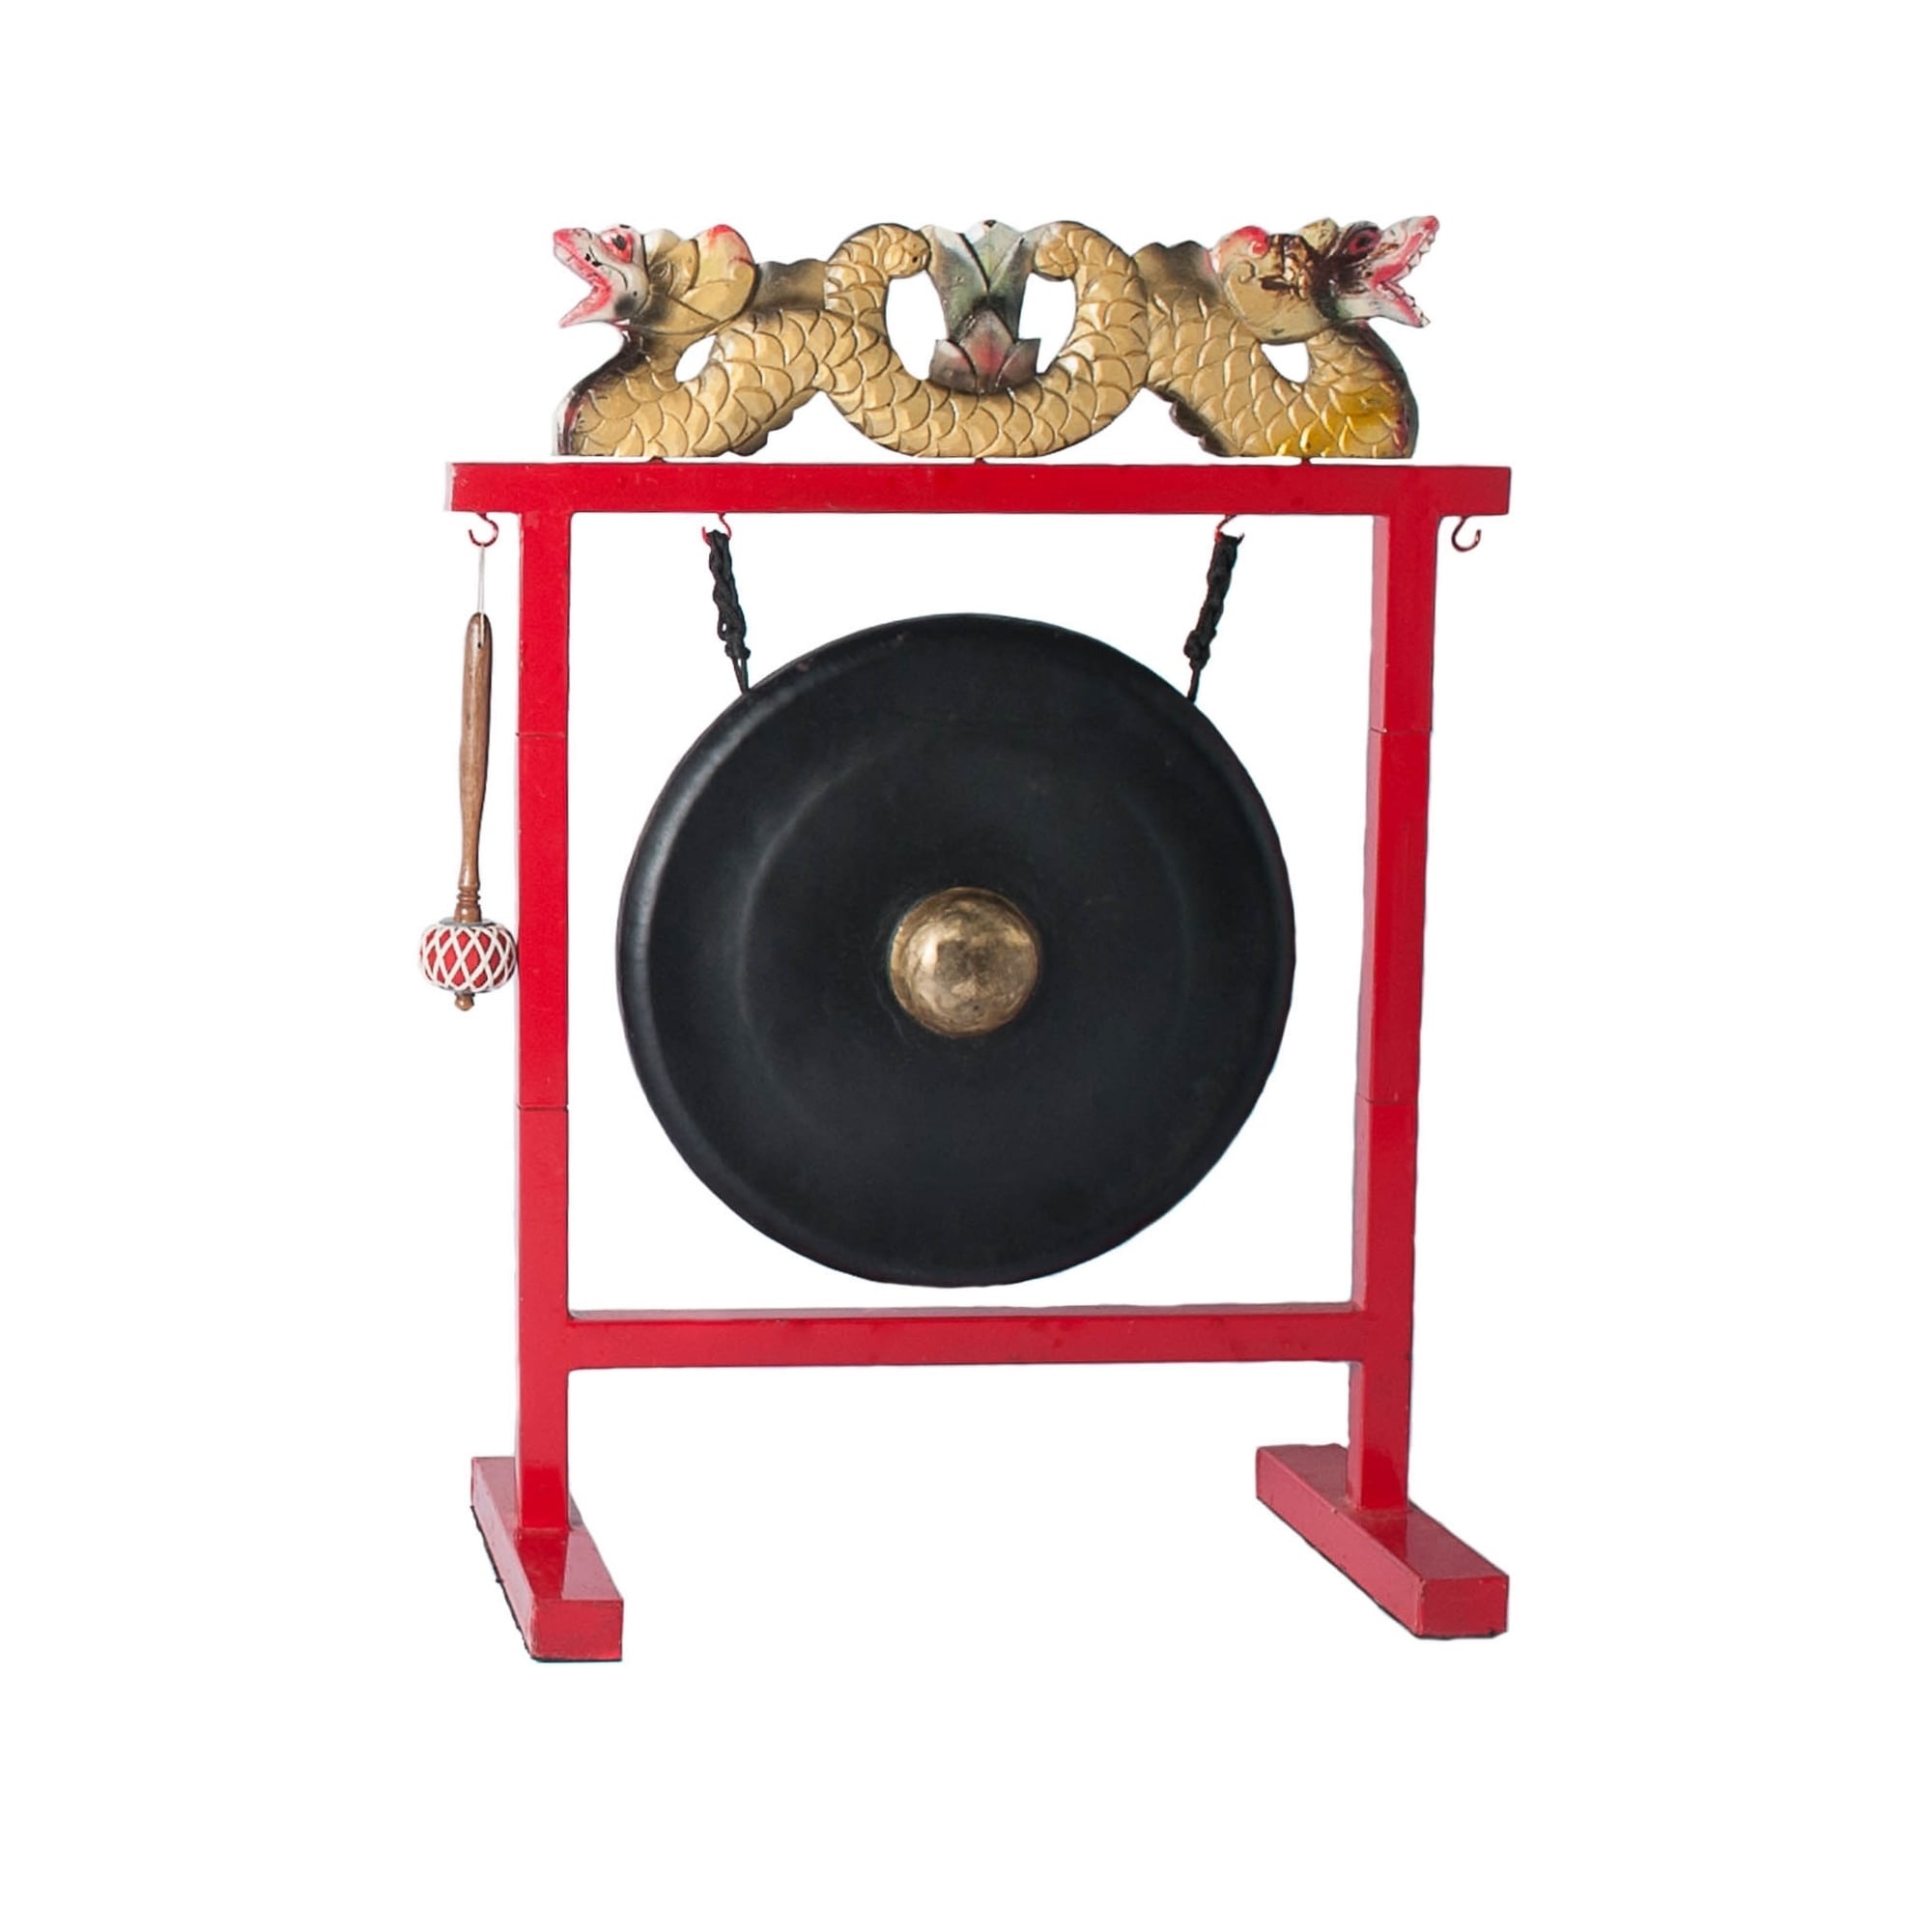 Gong: 16in (40cm) diameter gong with stand and beater, Gamelan beaters and accessories. 2000x2000 HD Wallpaper.